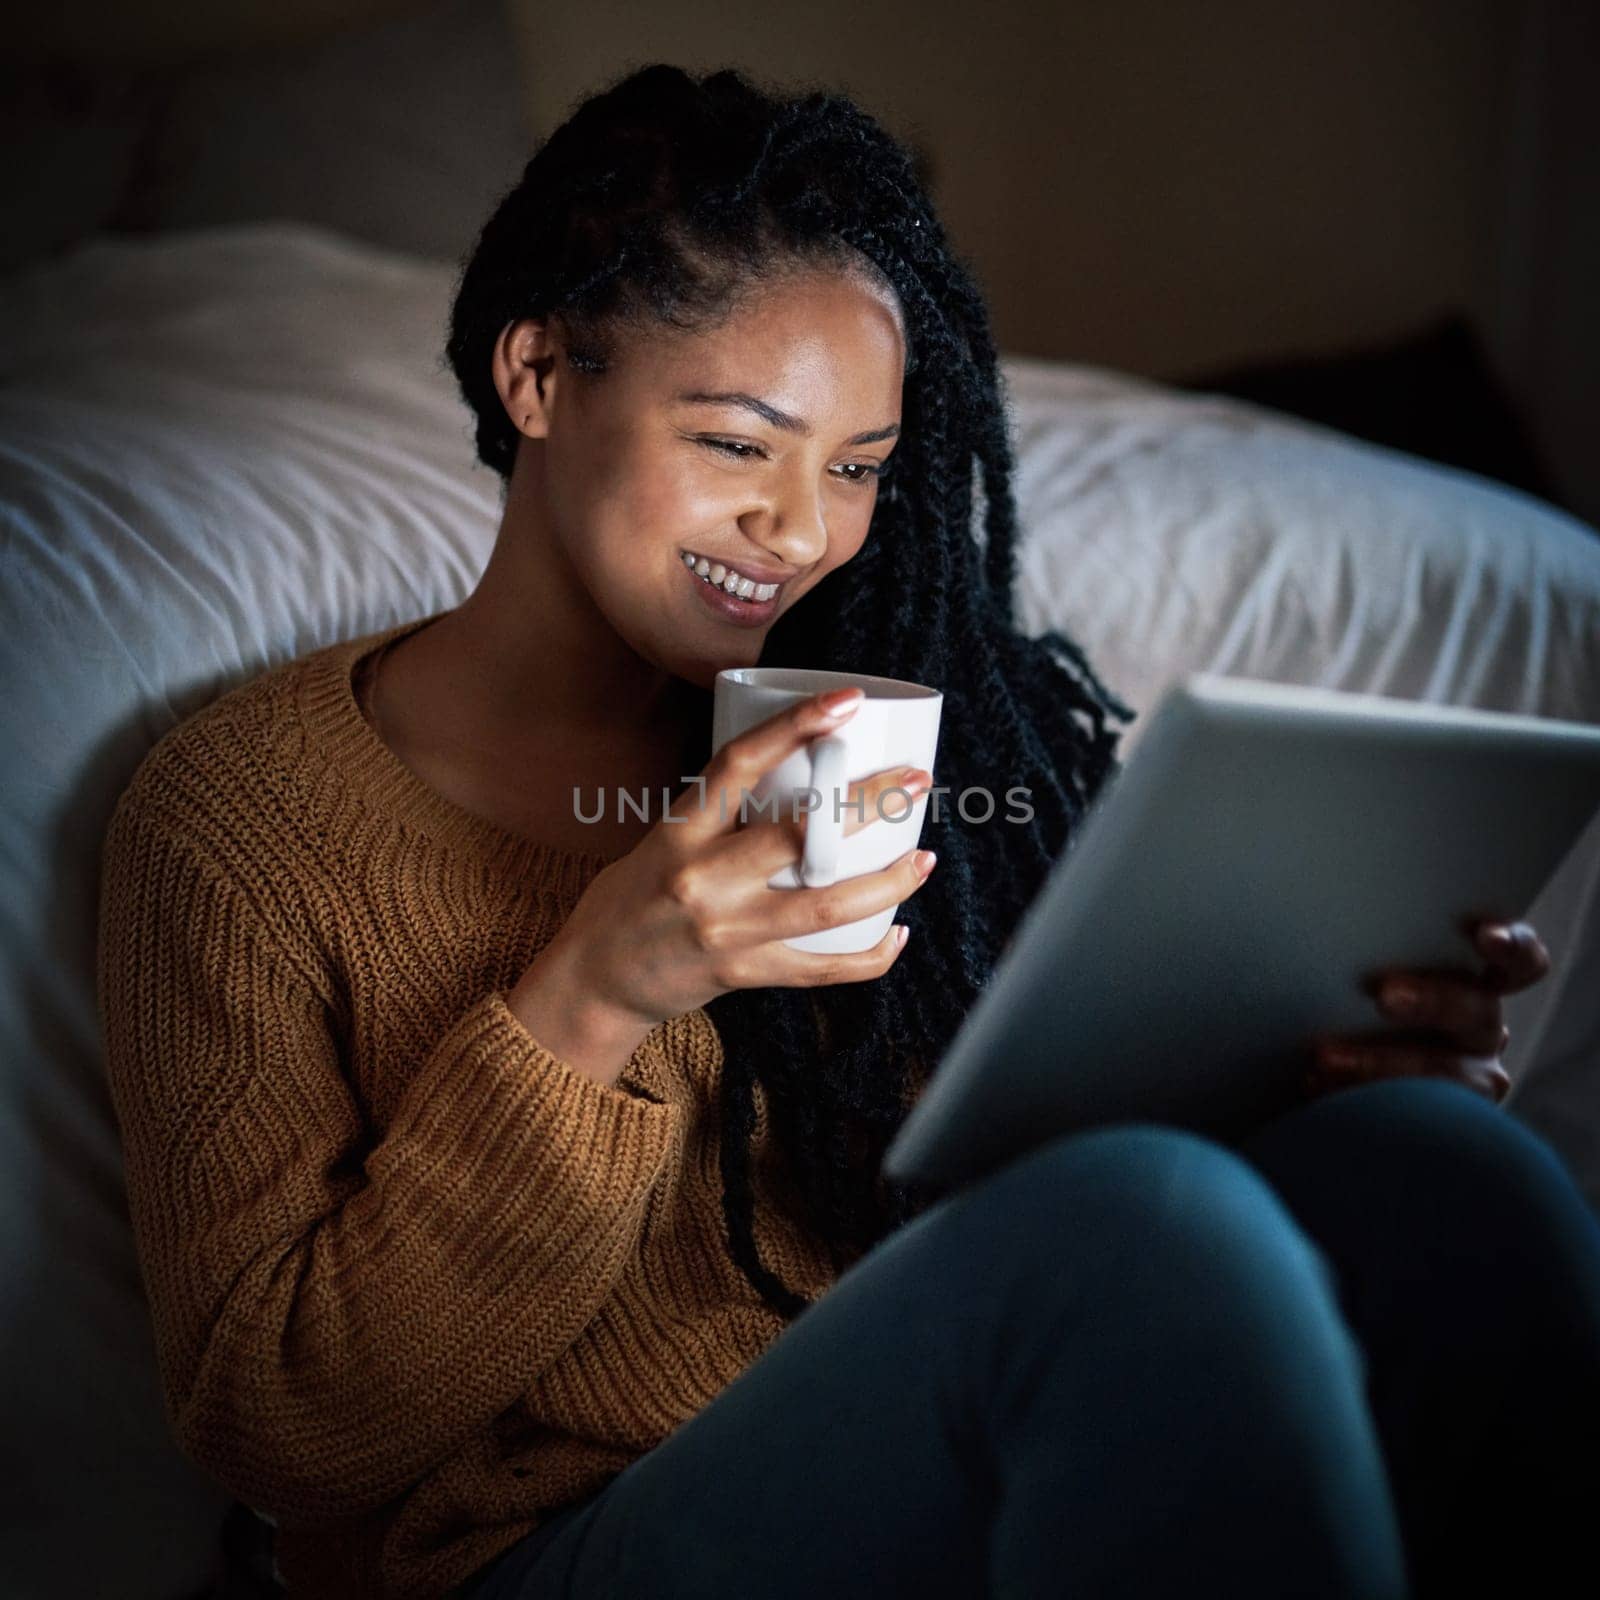 Indulging in some laziness after a long day. a relaxed young woman drinking coffee and using a digital tablet during the evening at home. by YuriArcurs